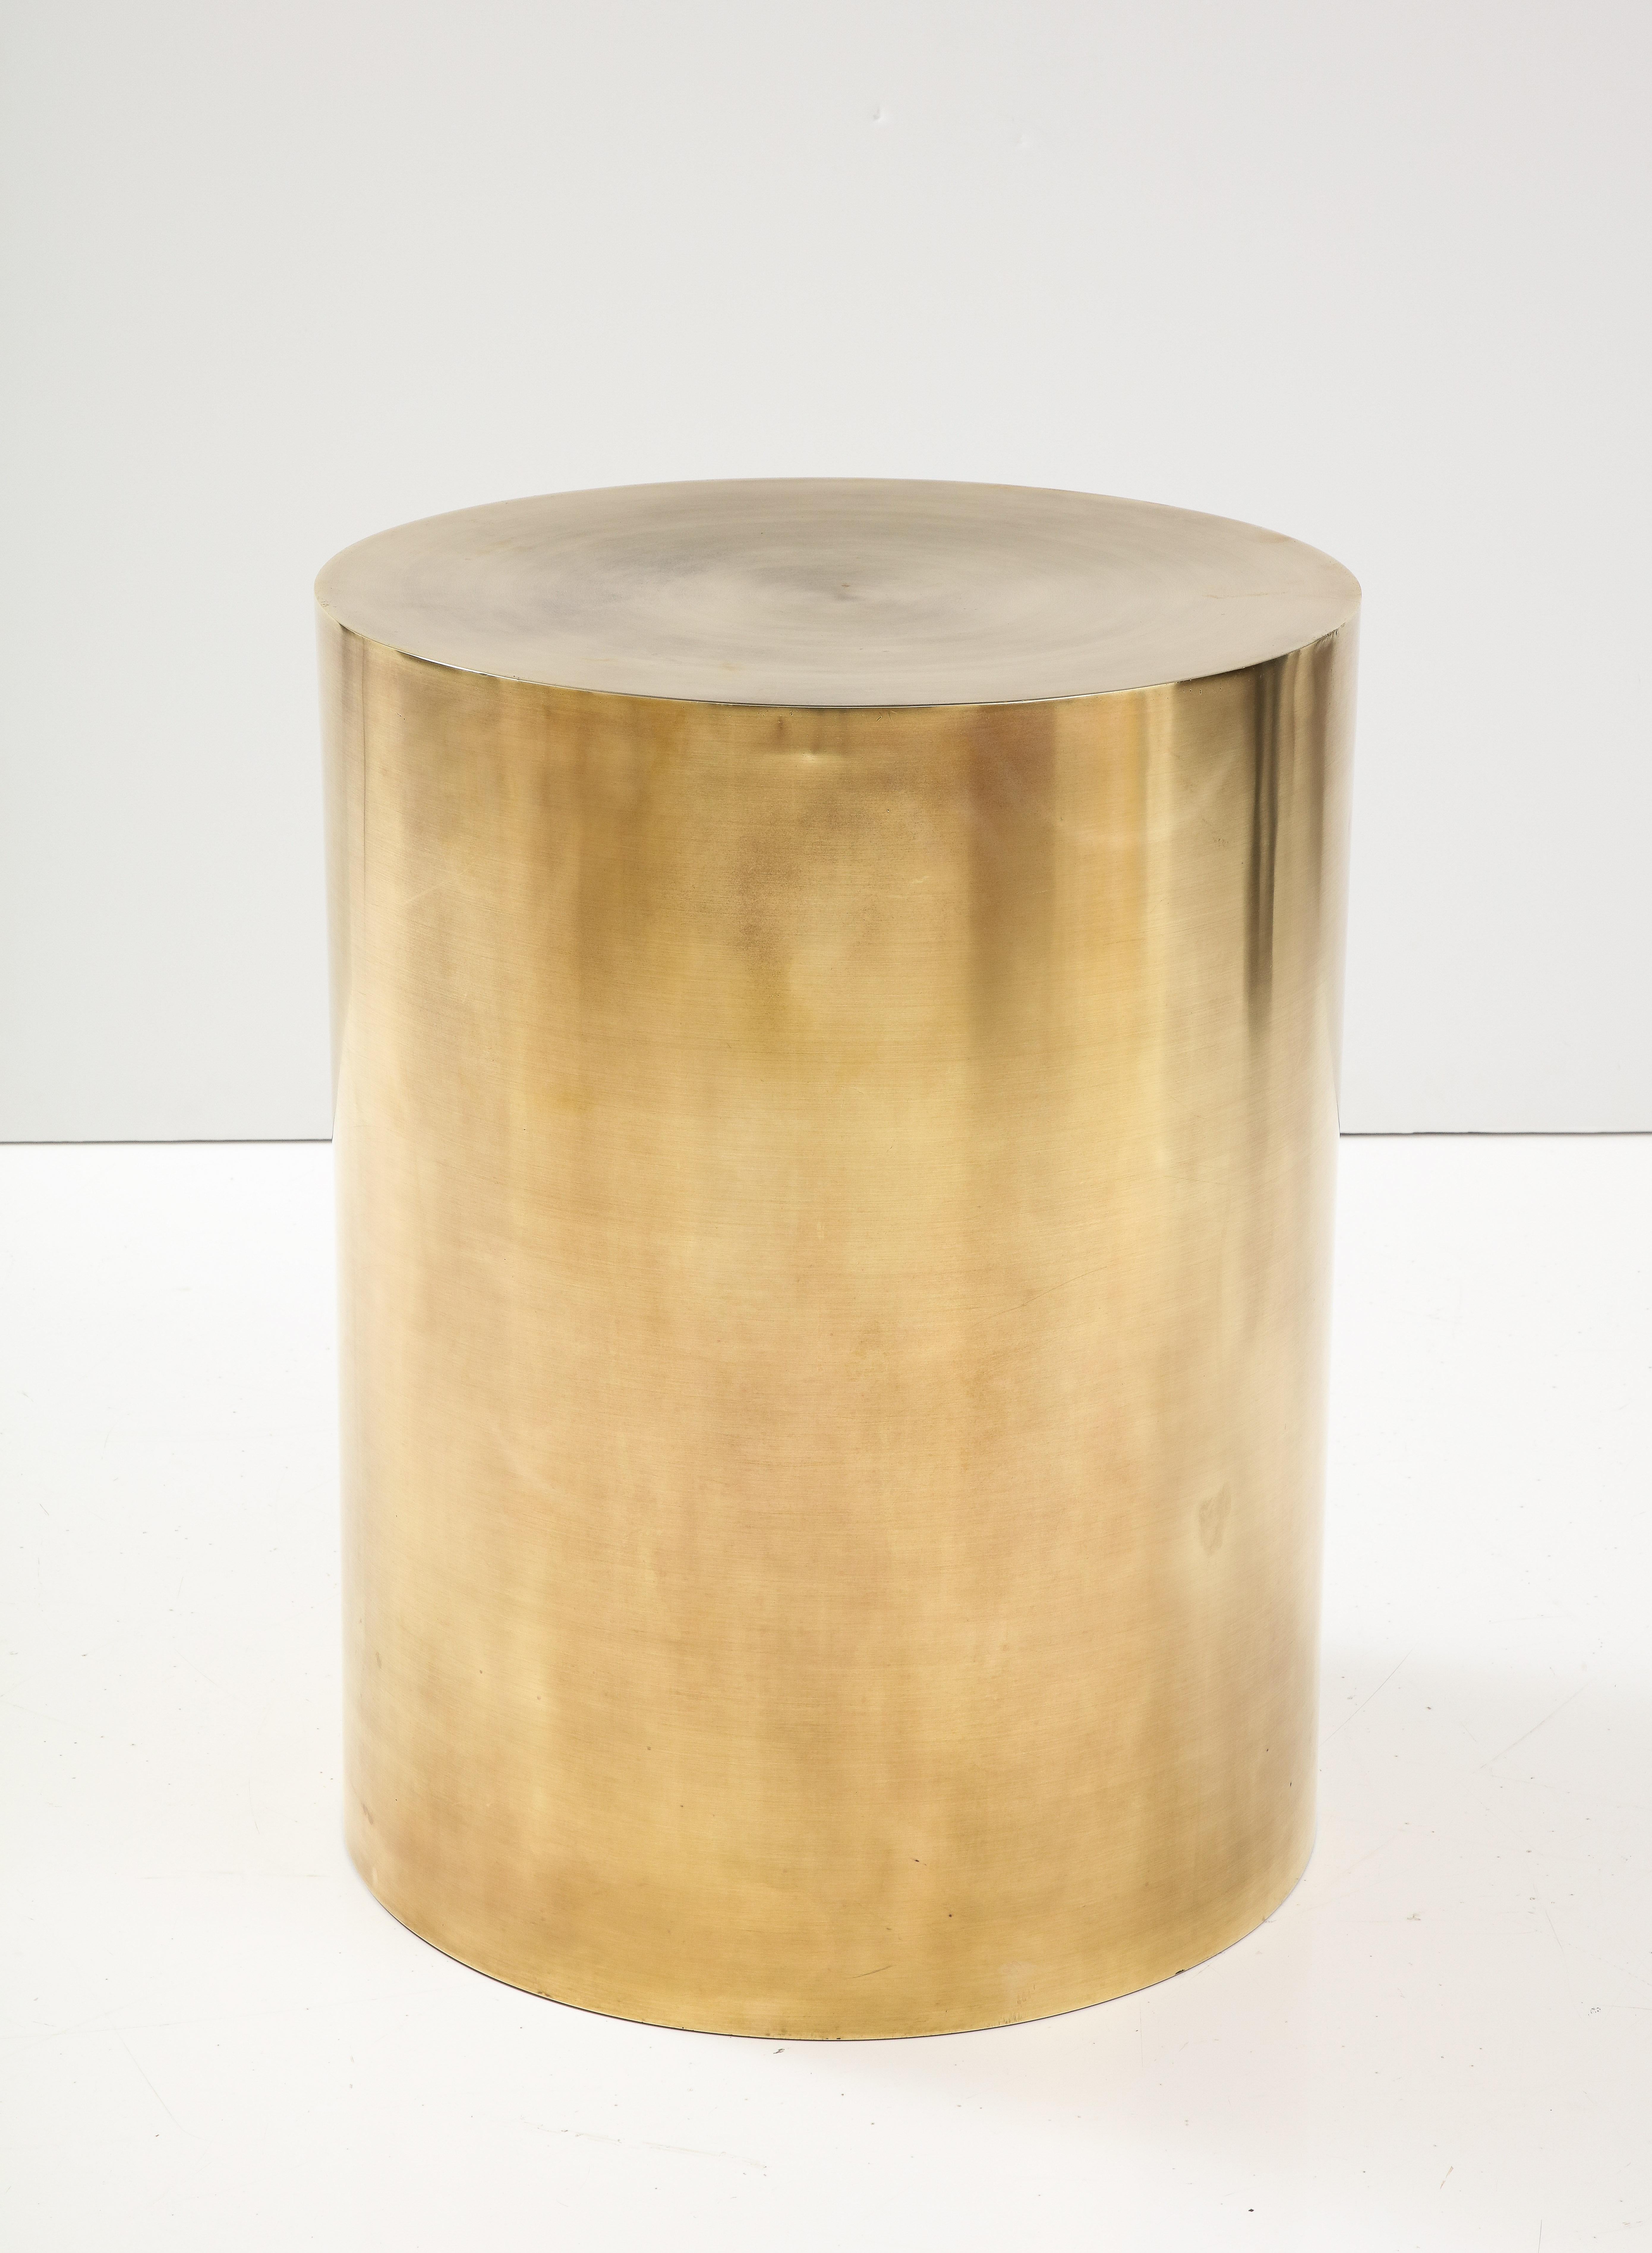 1970's Mid-Century Modern Brass Drum Dining Table Attributed To Brueton For Sale 1